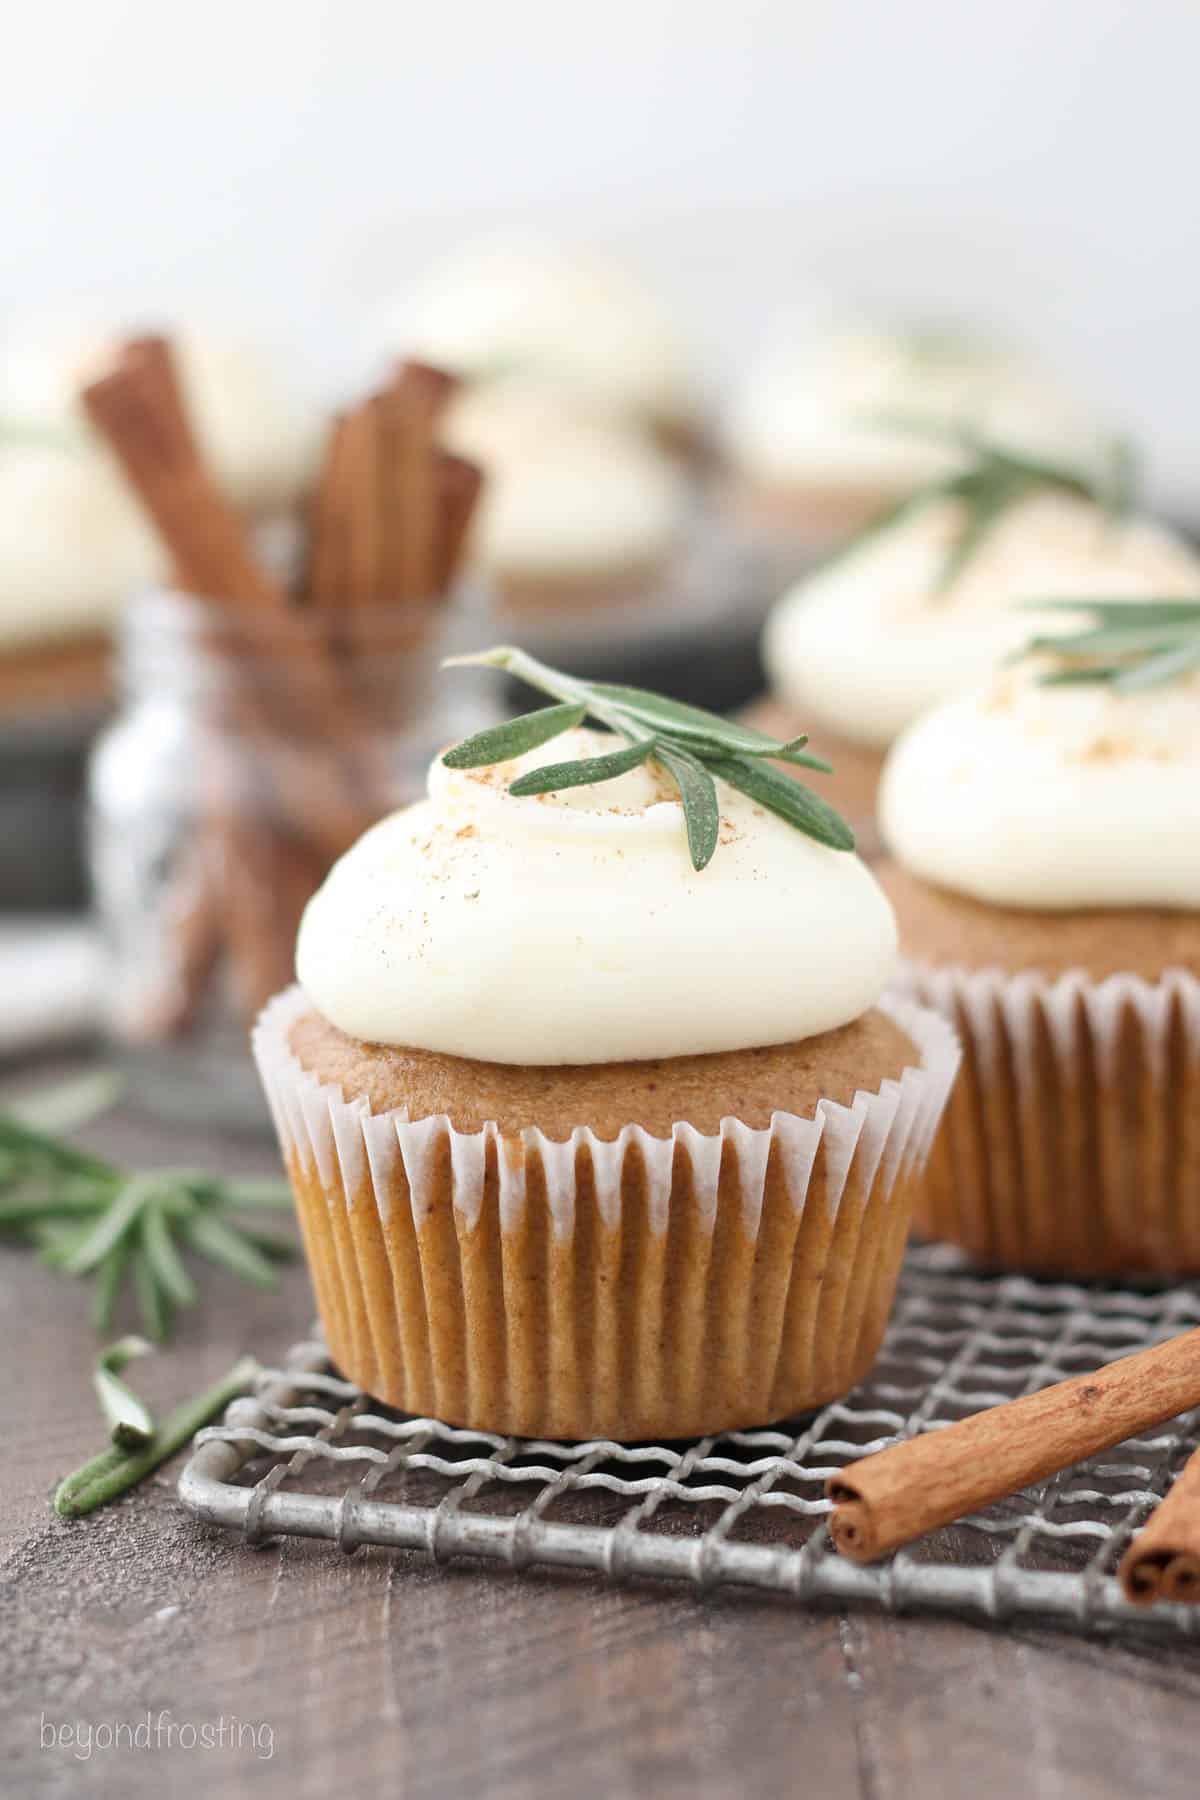 https://beyondfrosting.com/wp-content/uploads/2018/12/Gingerbread-Cupcakes-003.jpg